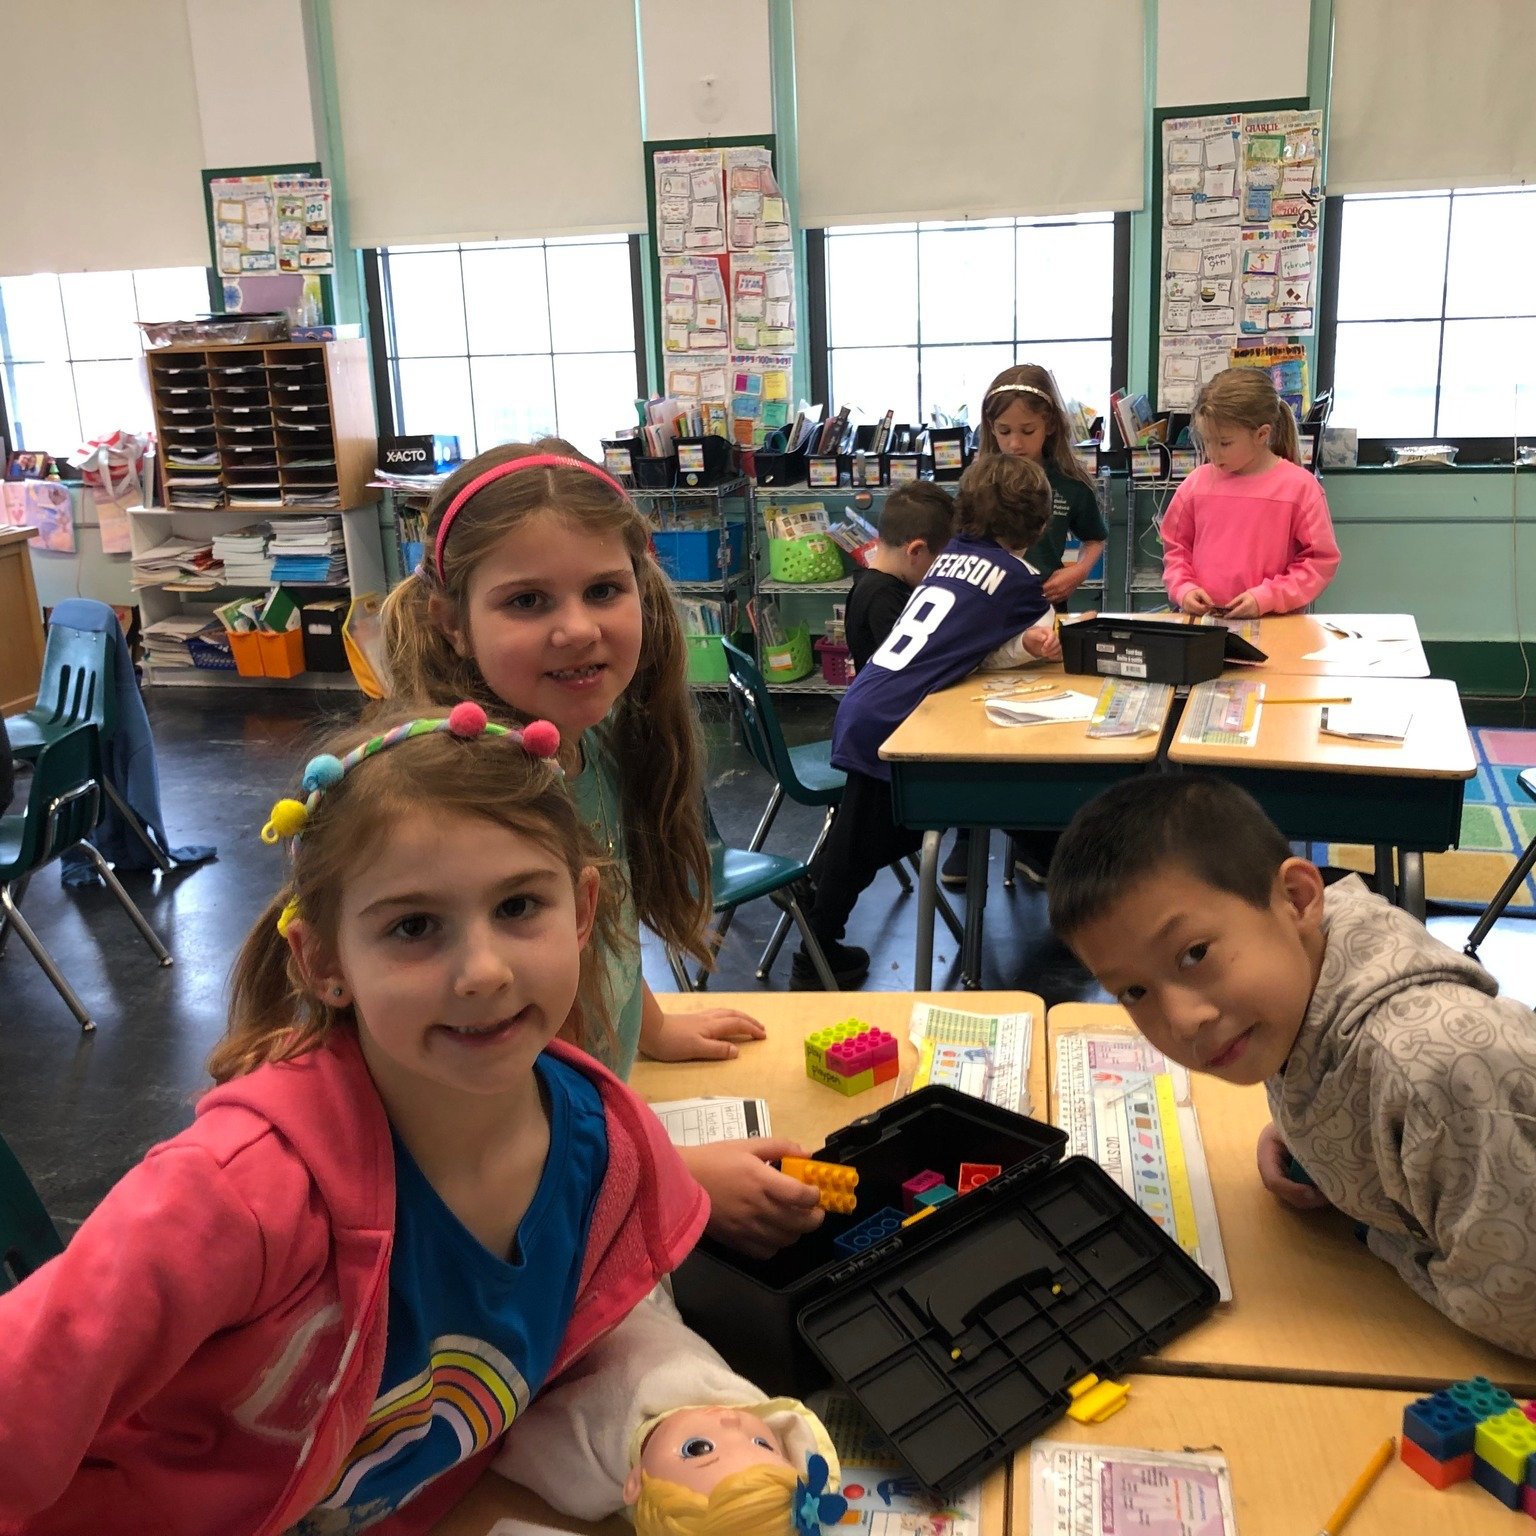 The students in grade 1 enjoyed celebrating compound word day last week! 1st grade was a construction zone as they visited various building centers.  The students were treated to surprise snacks that were of course - compound words! All were winners 